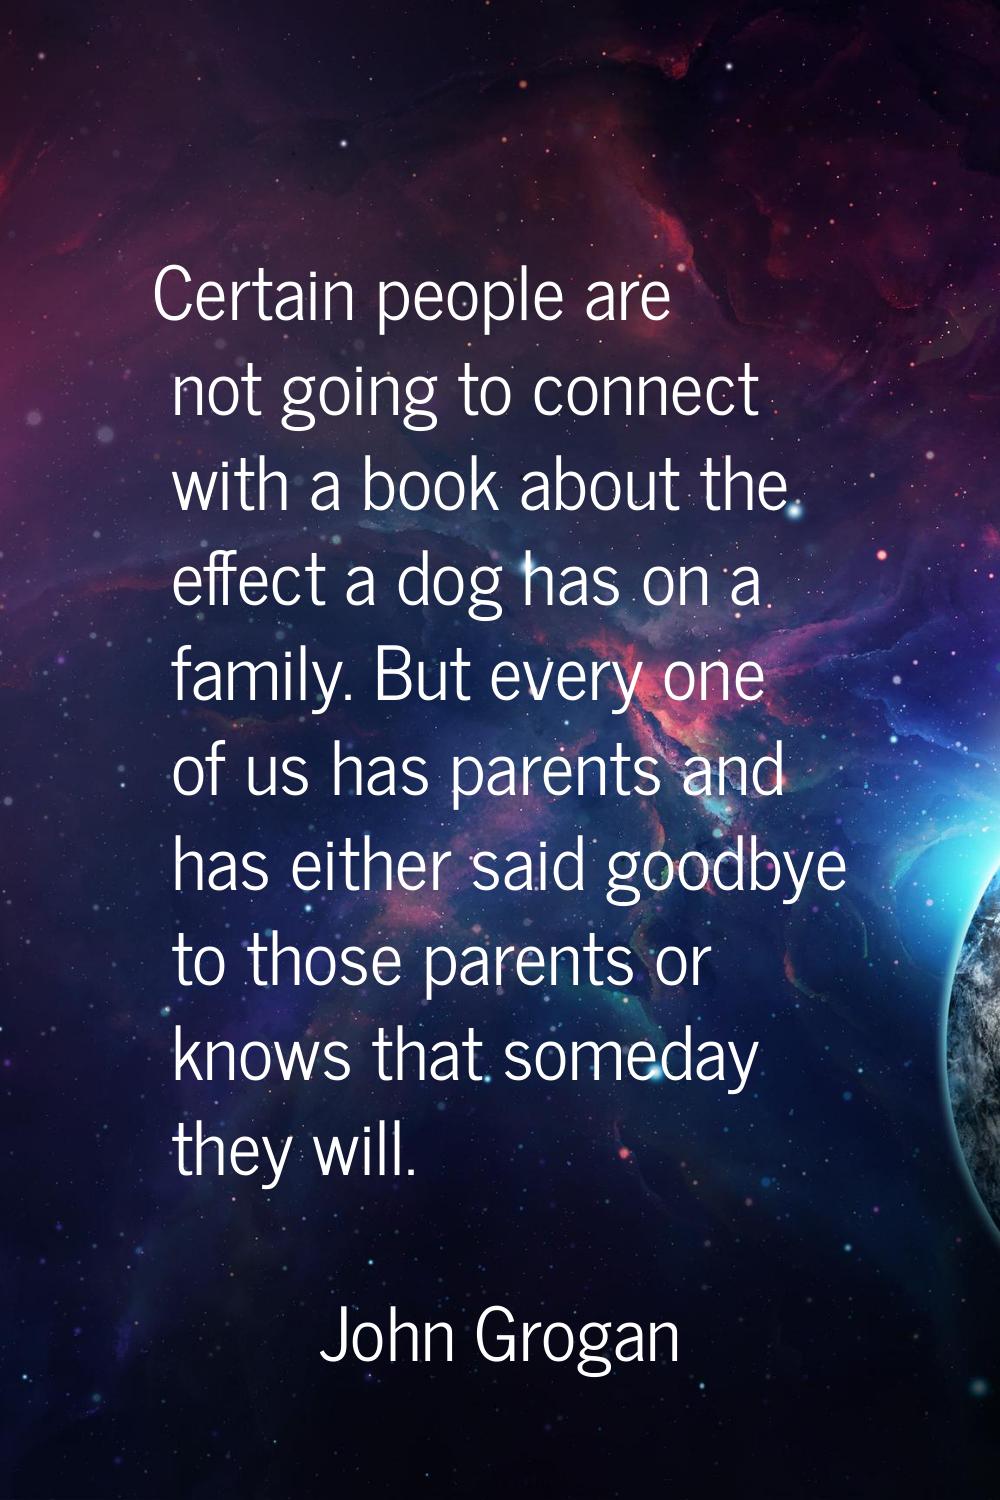 Certain people are not going to connect with a book about the effect a dog has on a family. But eve